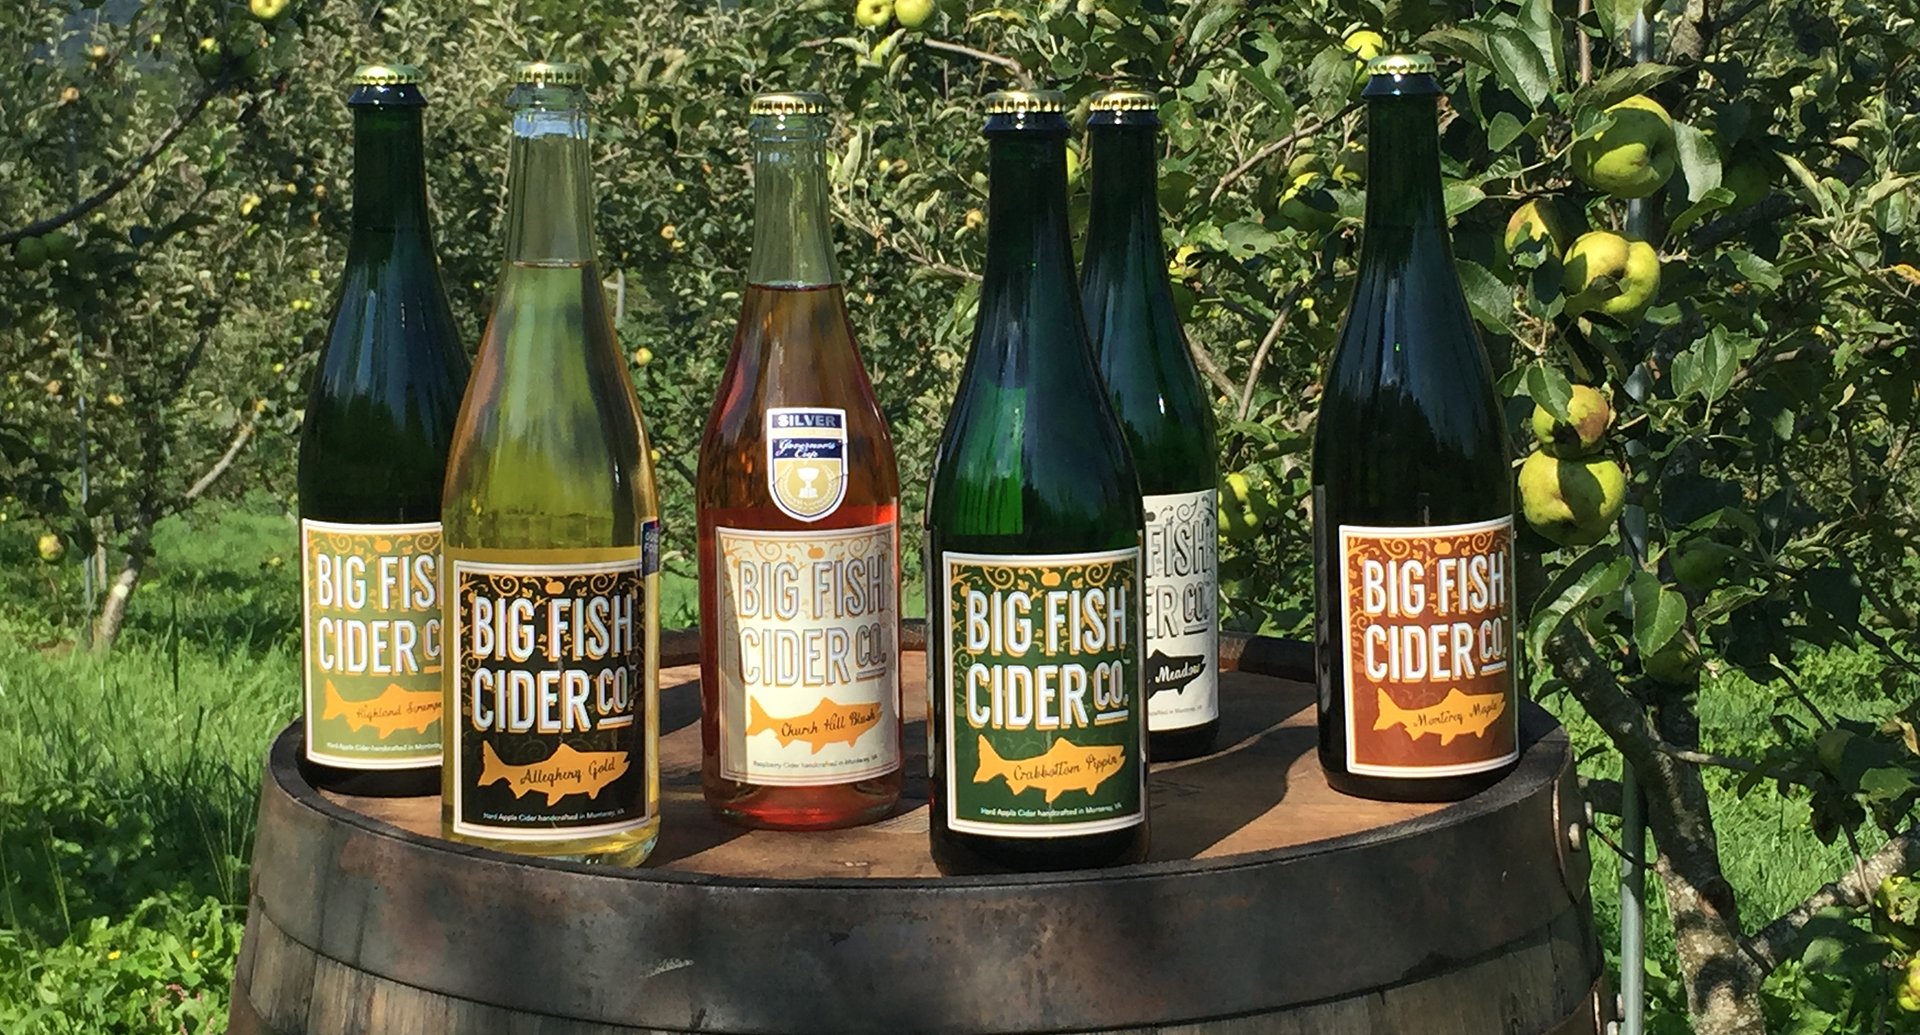 Bottles of Big Fish Cider sitting on top of a barrel in the orchard